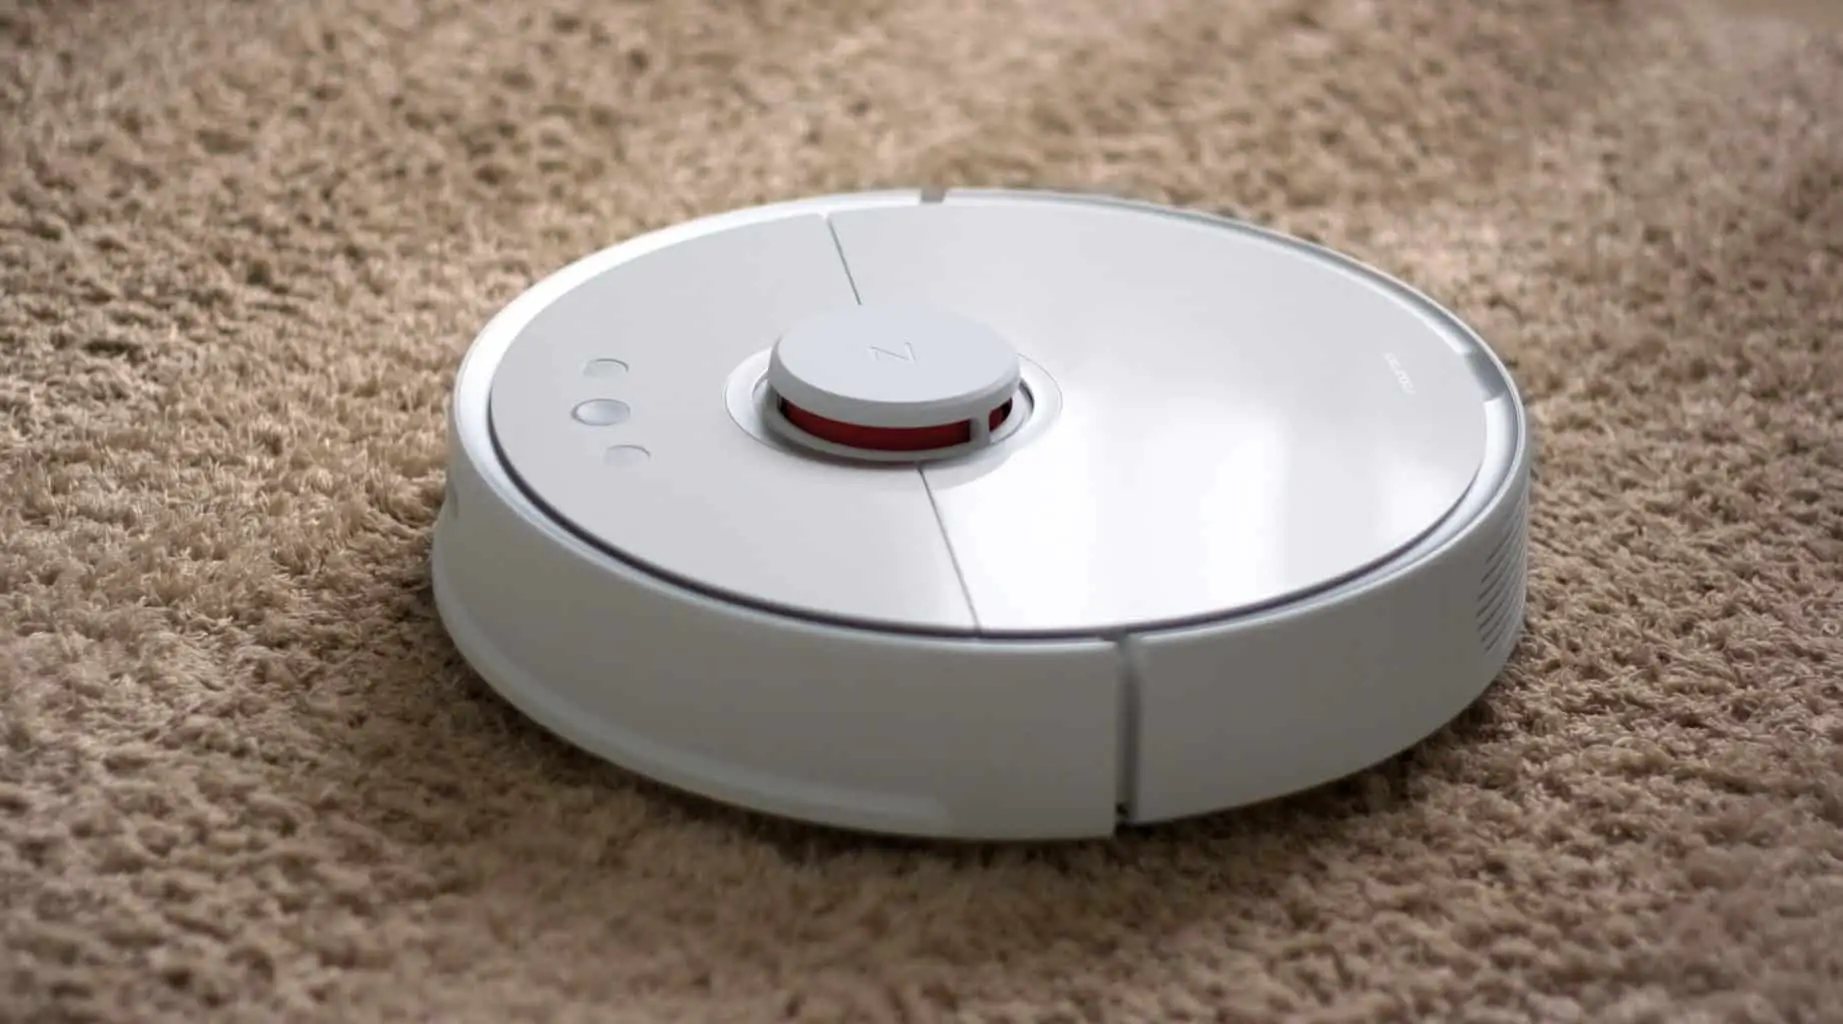 A white robot vacuum on a rug